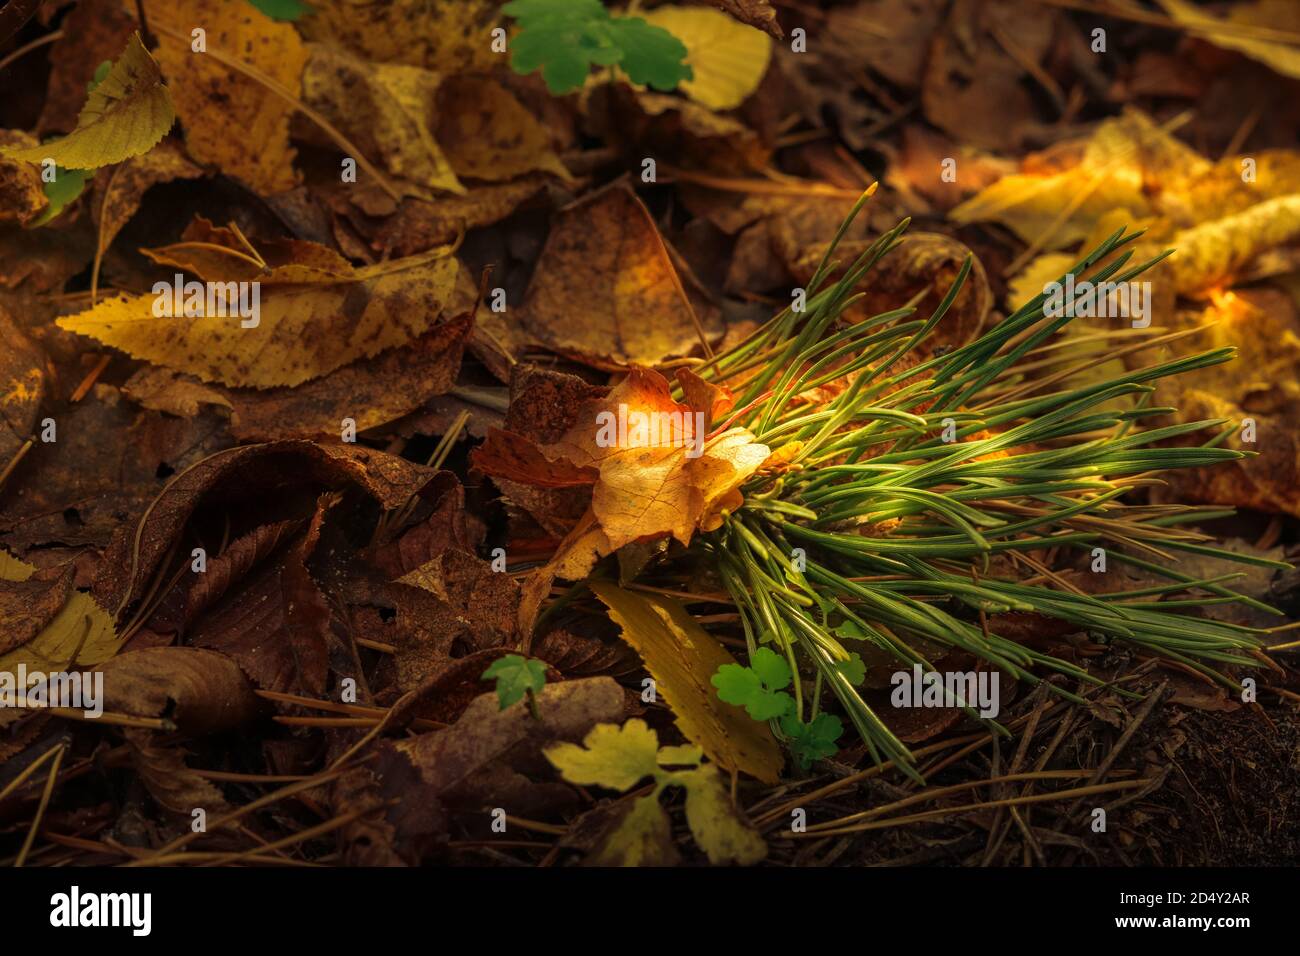 Fairy scene in autumn forest. Green small pine branch lit with sun light on a ground covered with dry yellow leaves Stock Photo